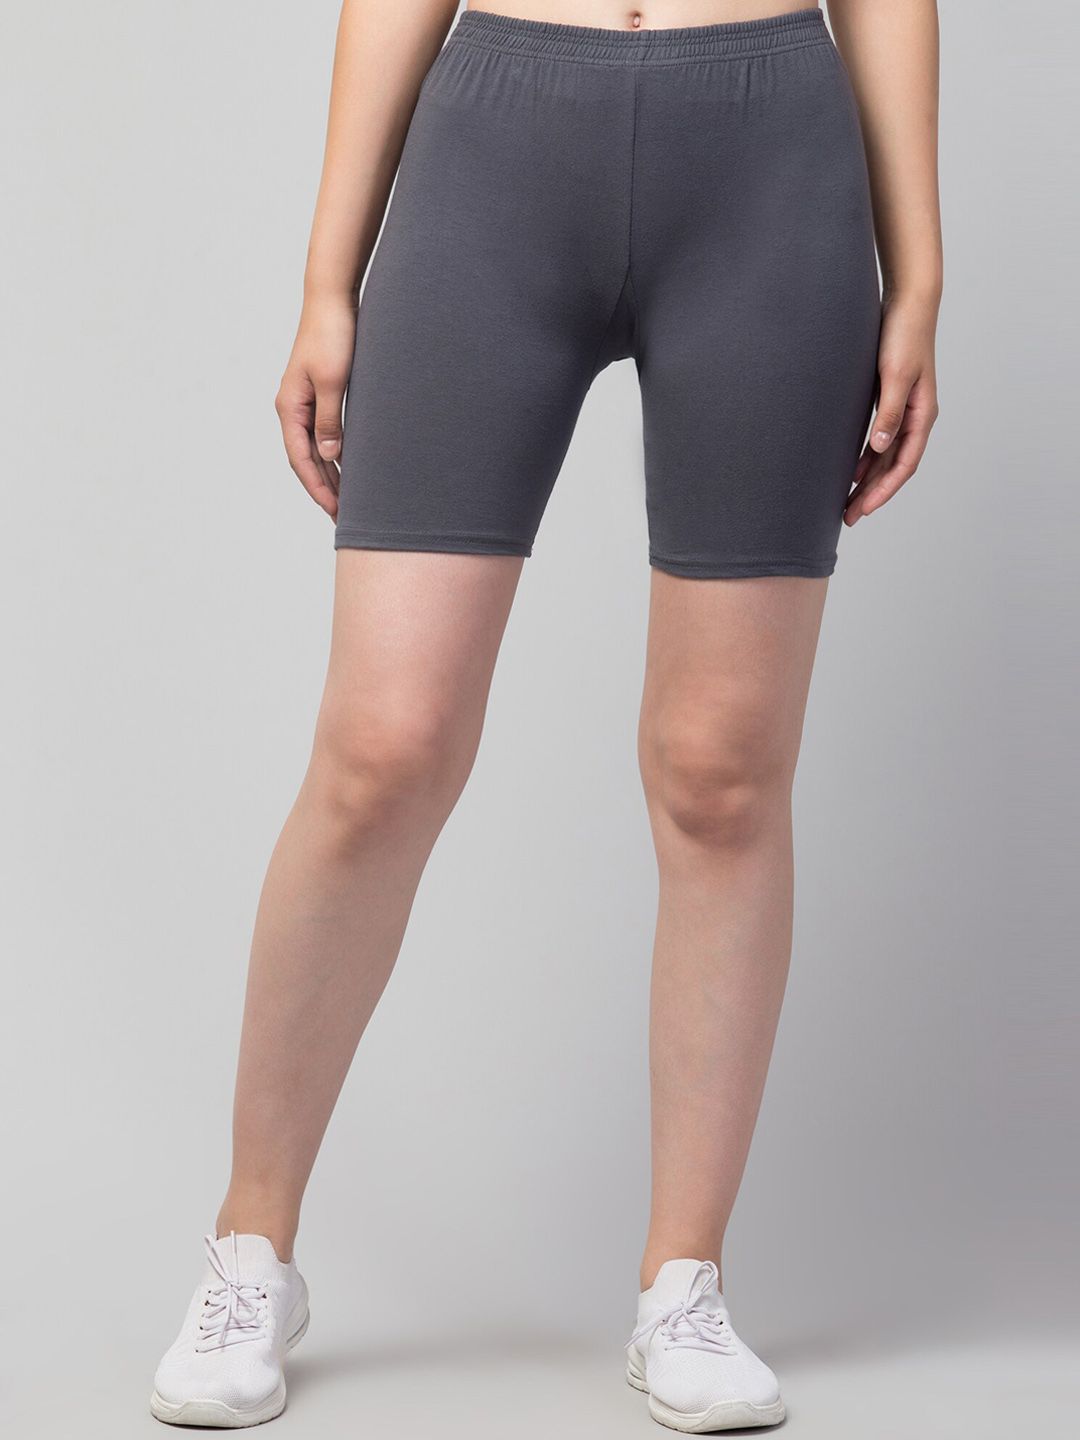 Apraa & Parma Women Slim Fit Pure Cotton Cycling Sports Shorts Price in India